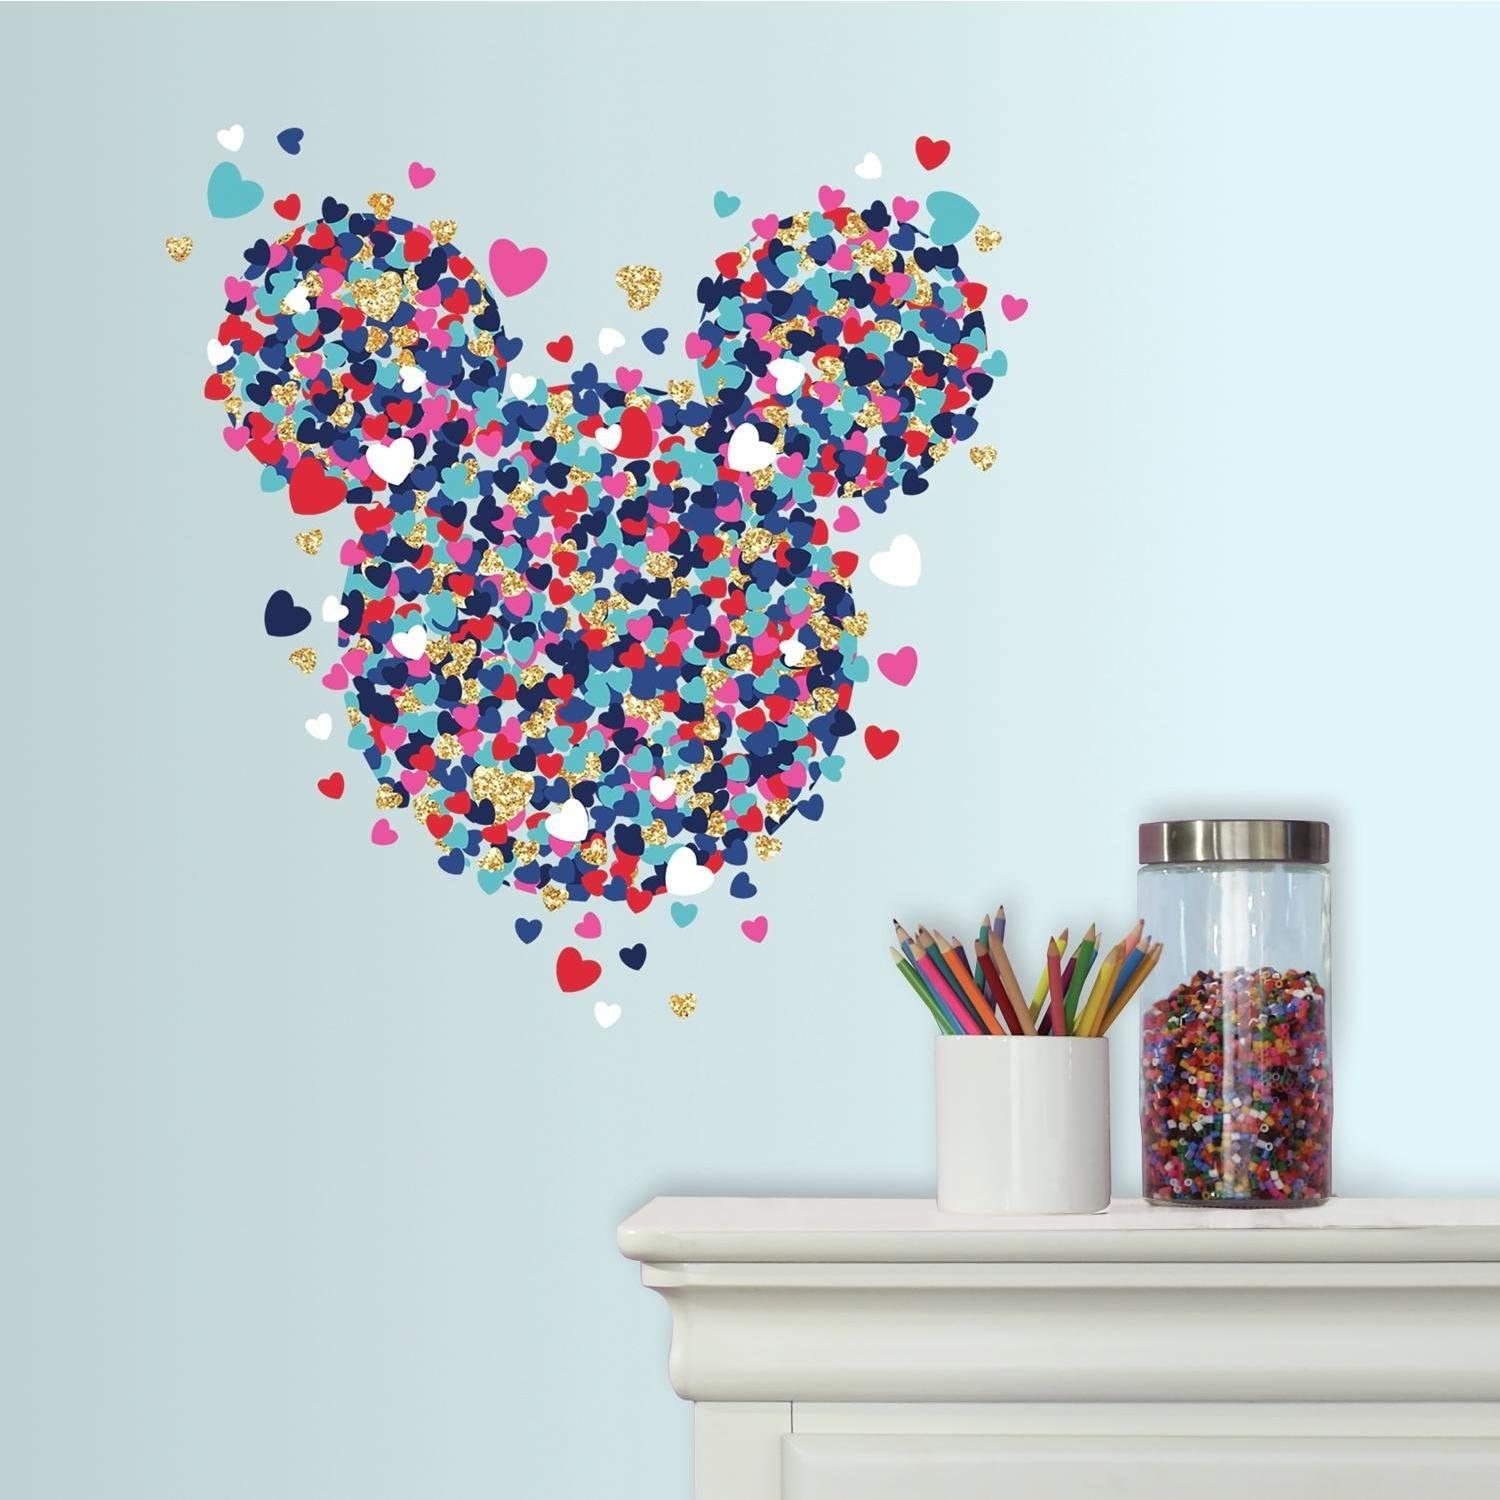 A multicolored glittery Mickey mouse wall decal made of up little hearts 